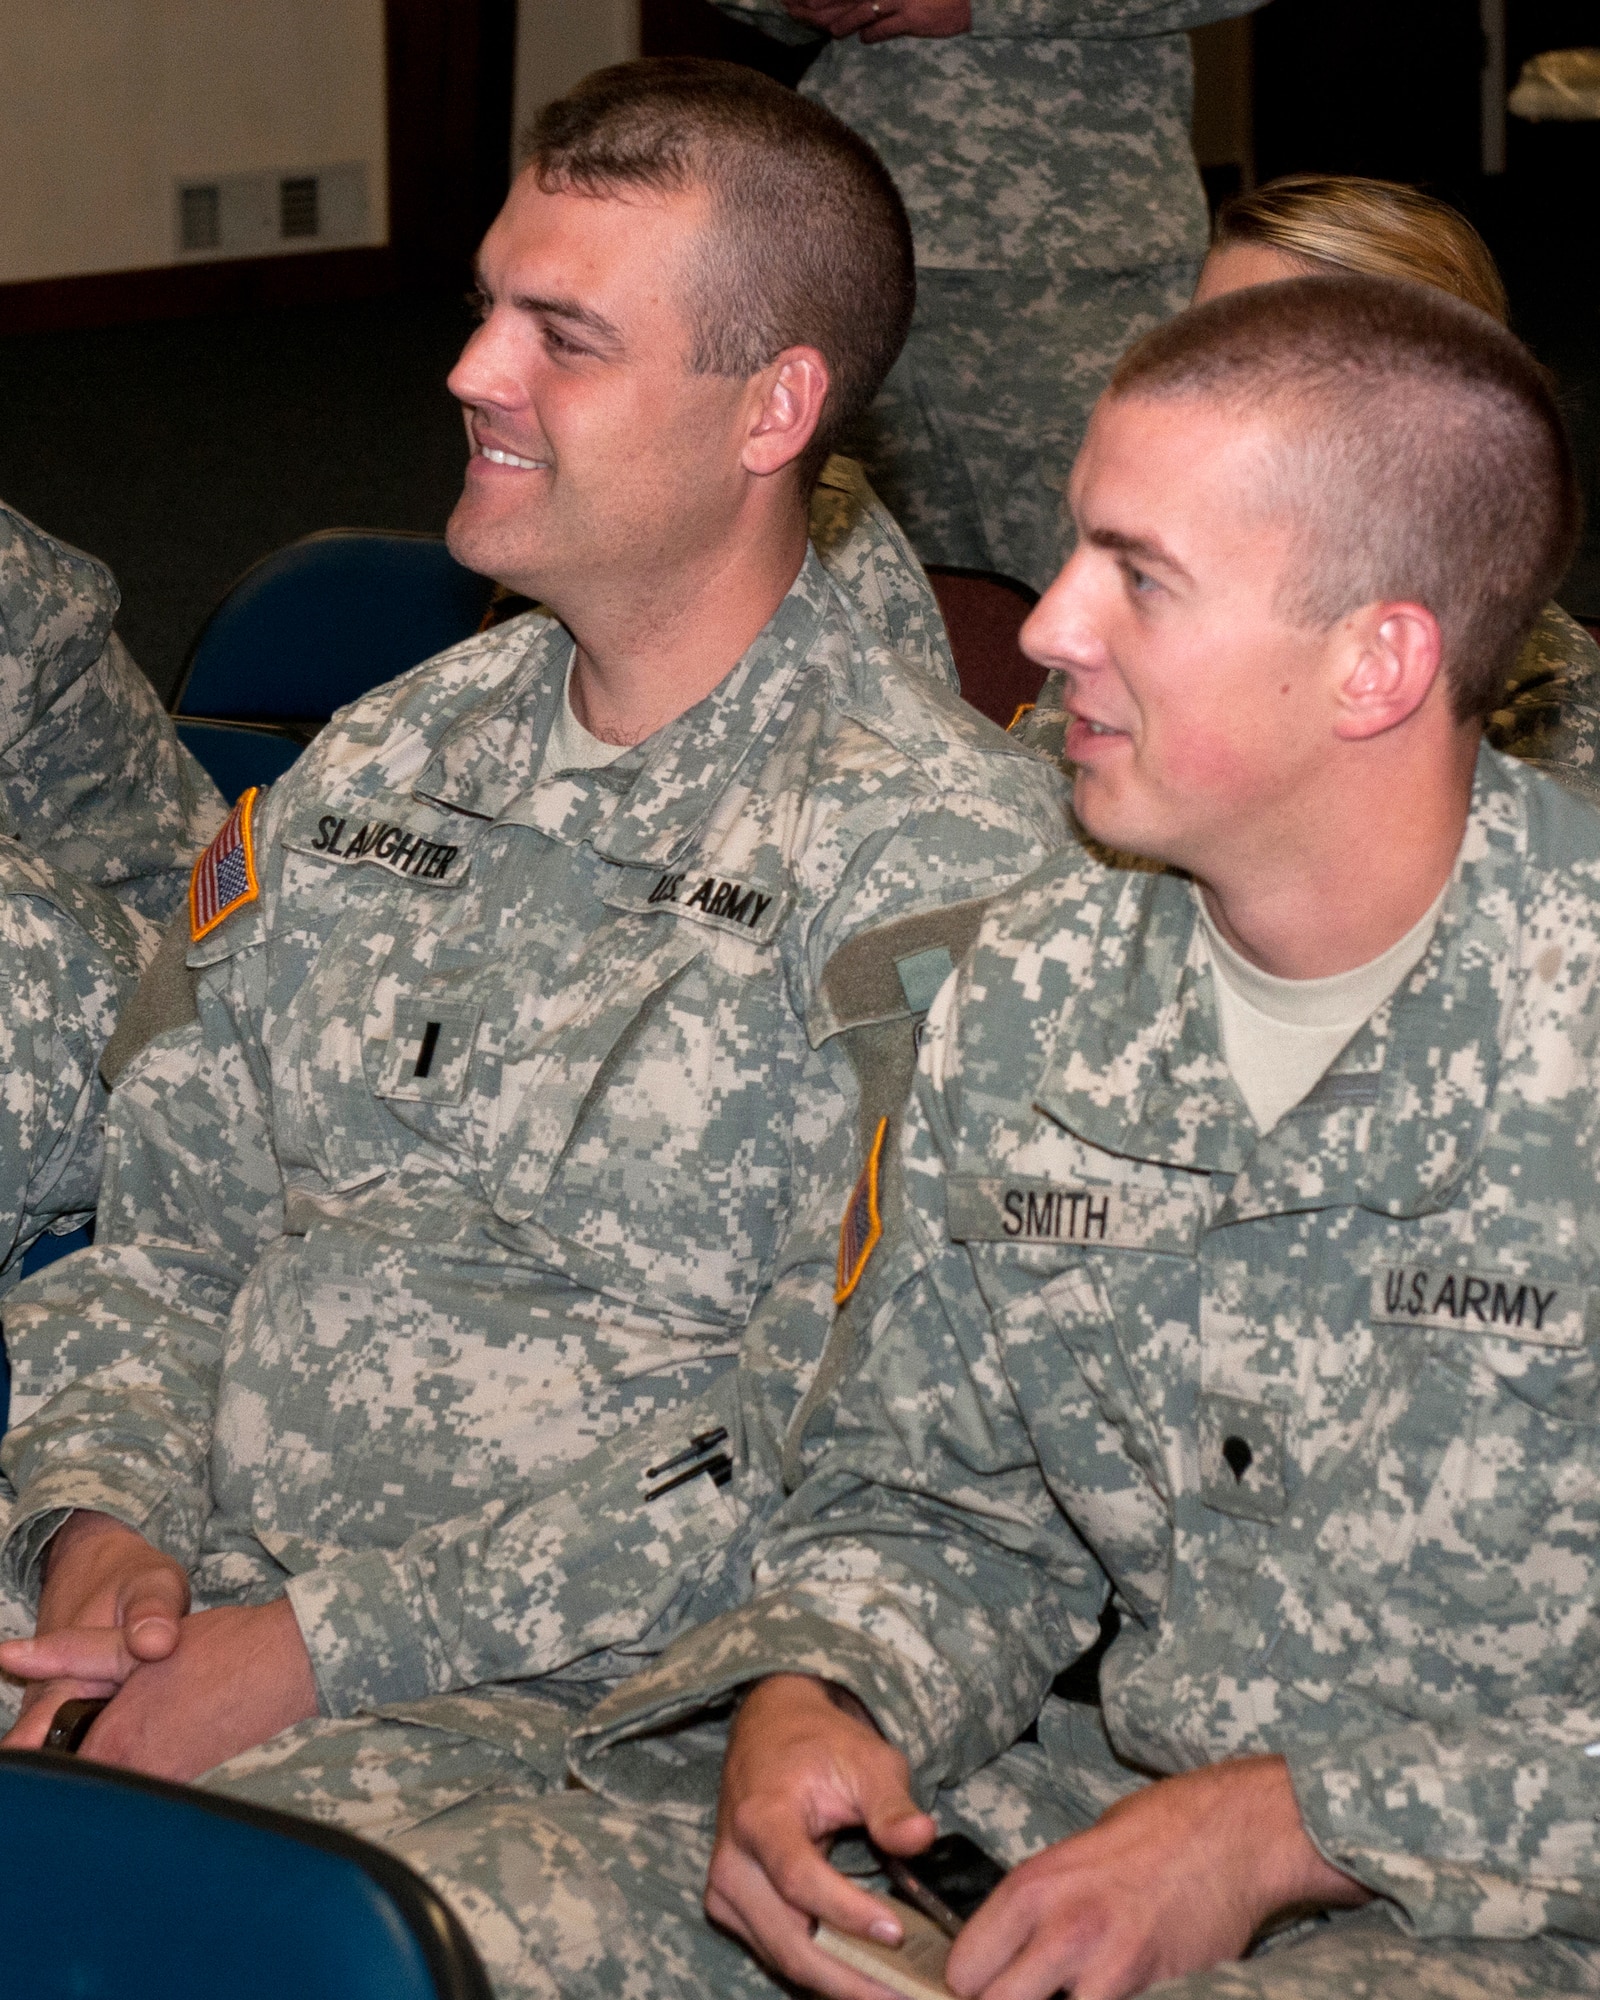 1st Lt. Mark Slaughter, a Kentucky Army National Guard chaplain candidate and Yellow Ribbon coordinator for the Louisville region, and Spc. Nathan Smith, a chaplain assistant for the 2/138th Headquarters Battalion, share a smile during the annual Joint Chaplaincy Corps Training Conference held at the Kentucky Air National Guard Base on Oct. 15. The corps uses the conference to prepare for upcoming events, new programs and policy changes such as the recent repeal of Don't Ask, Don't Tell.  (U.S. Air Force photo by Tech Sgt. Jason Ketterer)